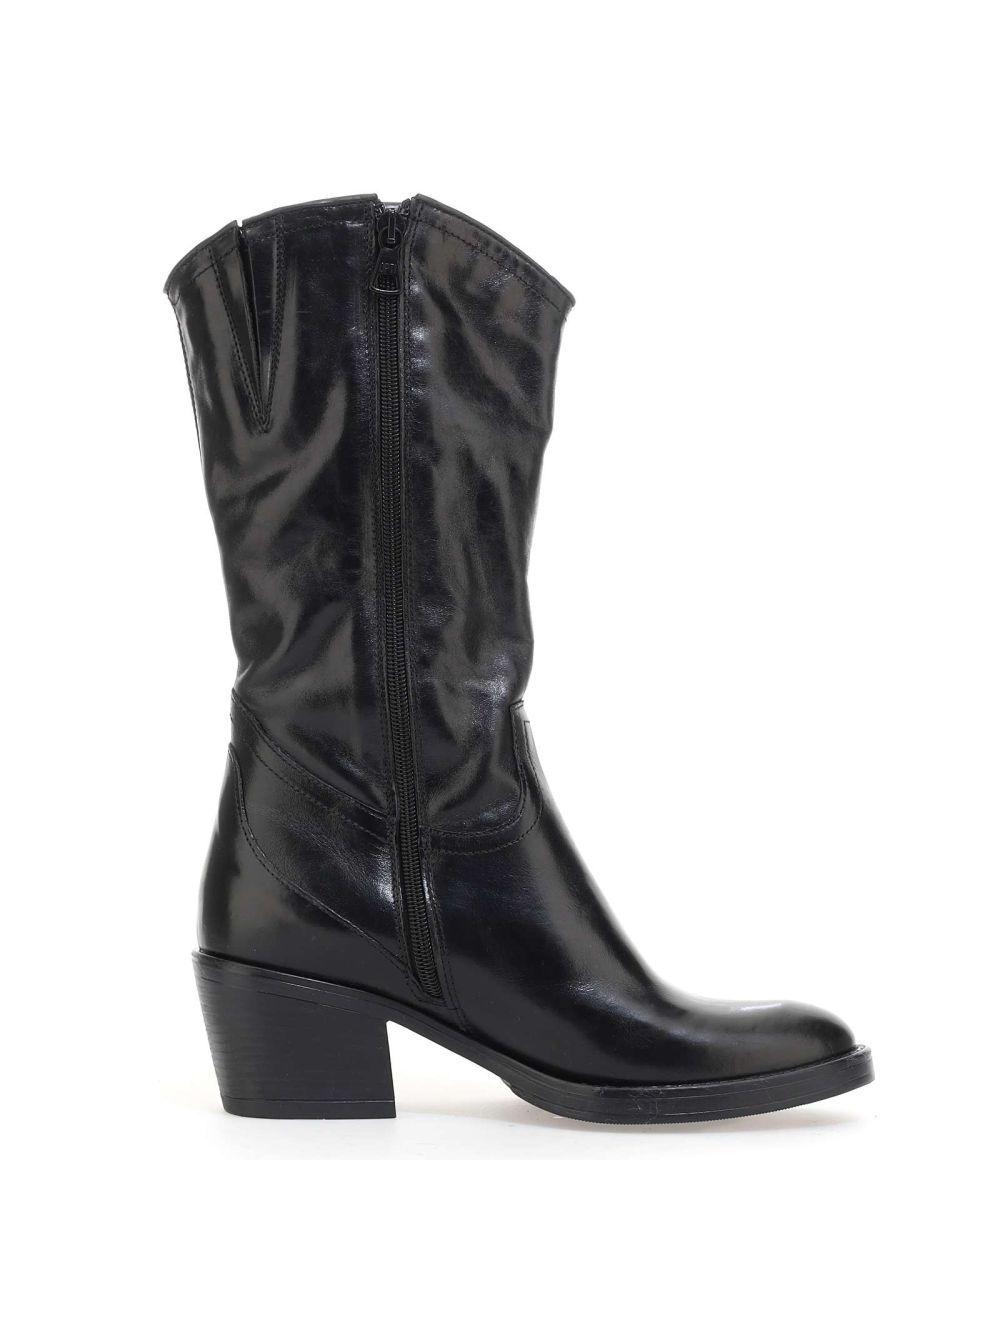 BOOTS GIVE DODA | Shoes, Ankle Boot and Sandals